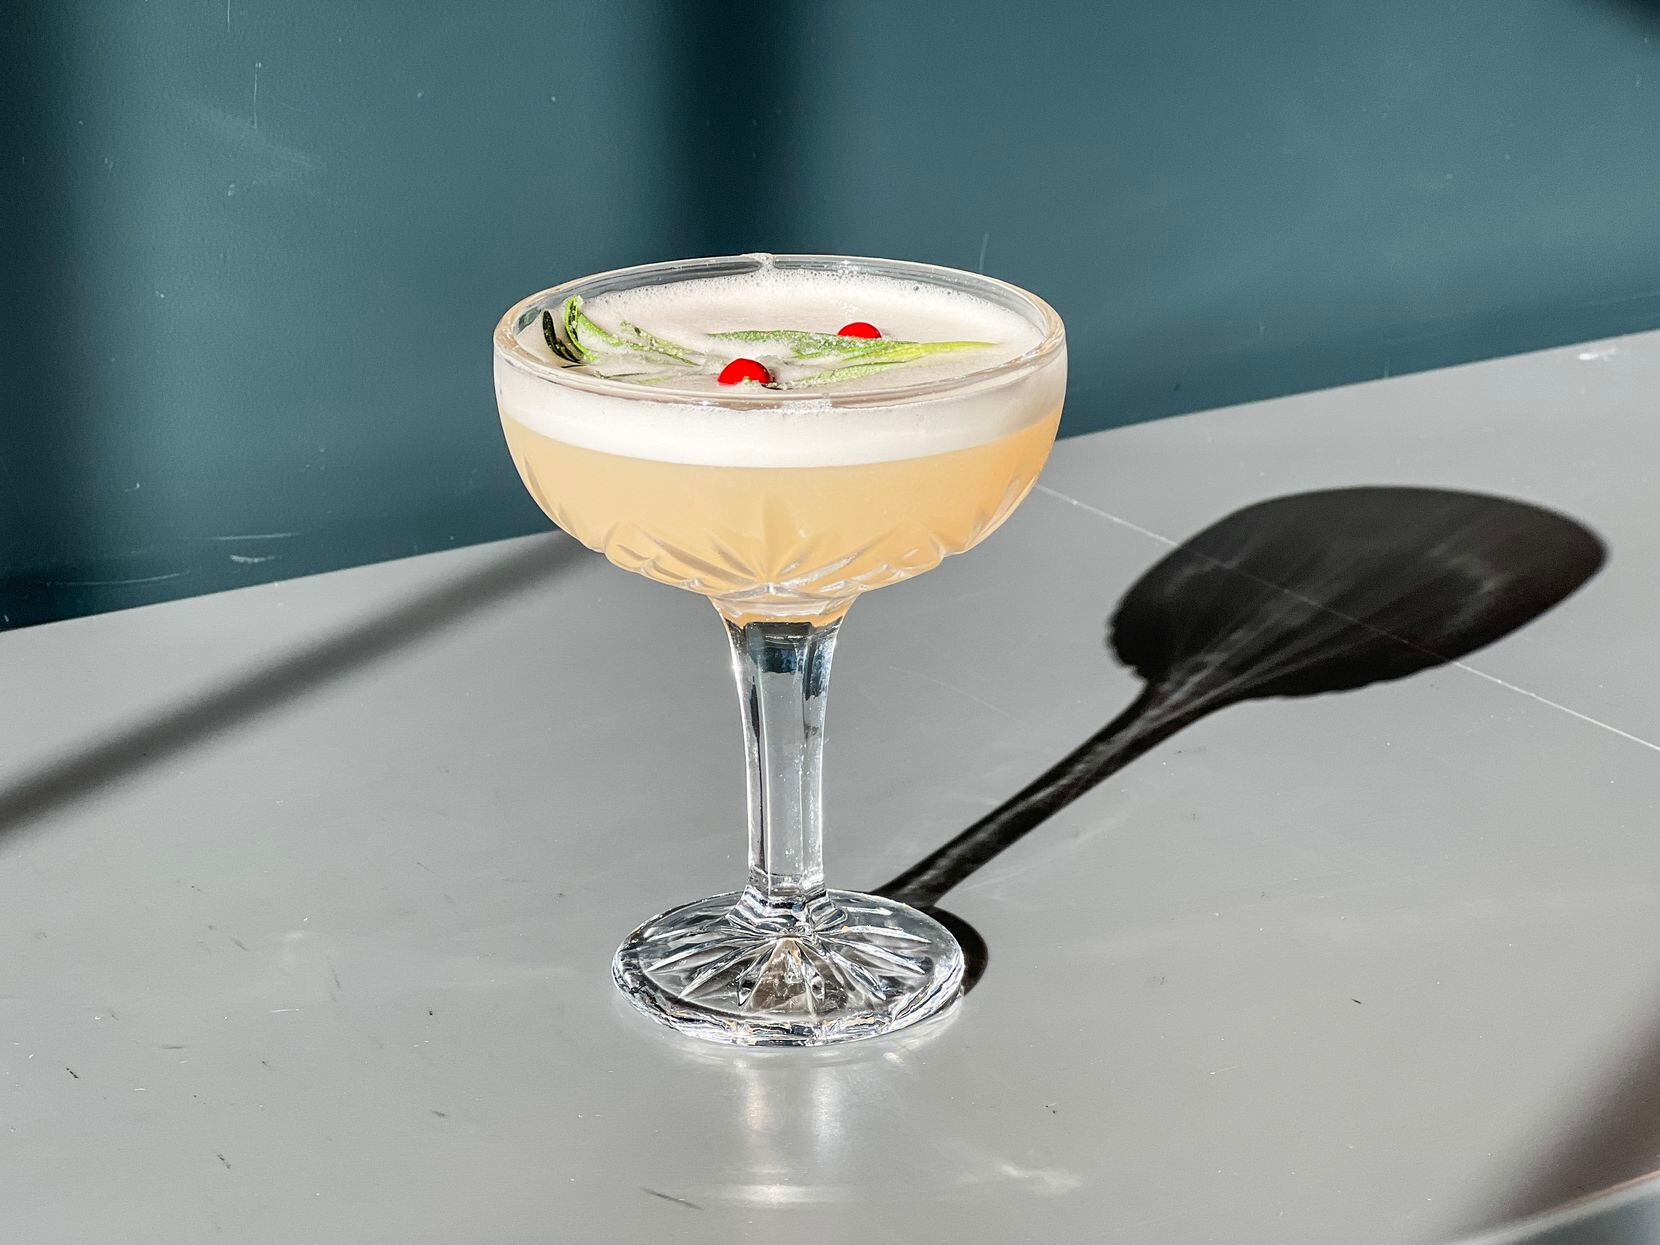 Bacchus Kitchen and Bar at Hotel Vin is serving holiday cocktails this year, including the...